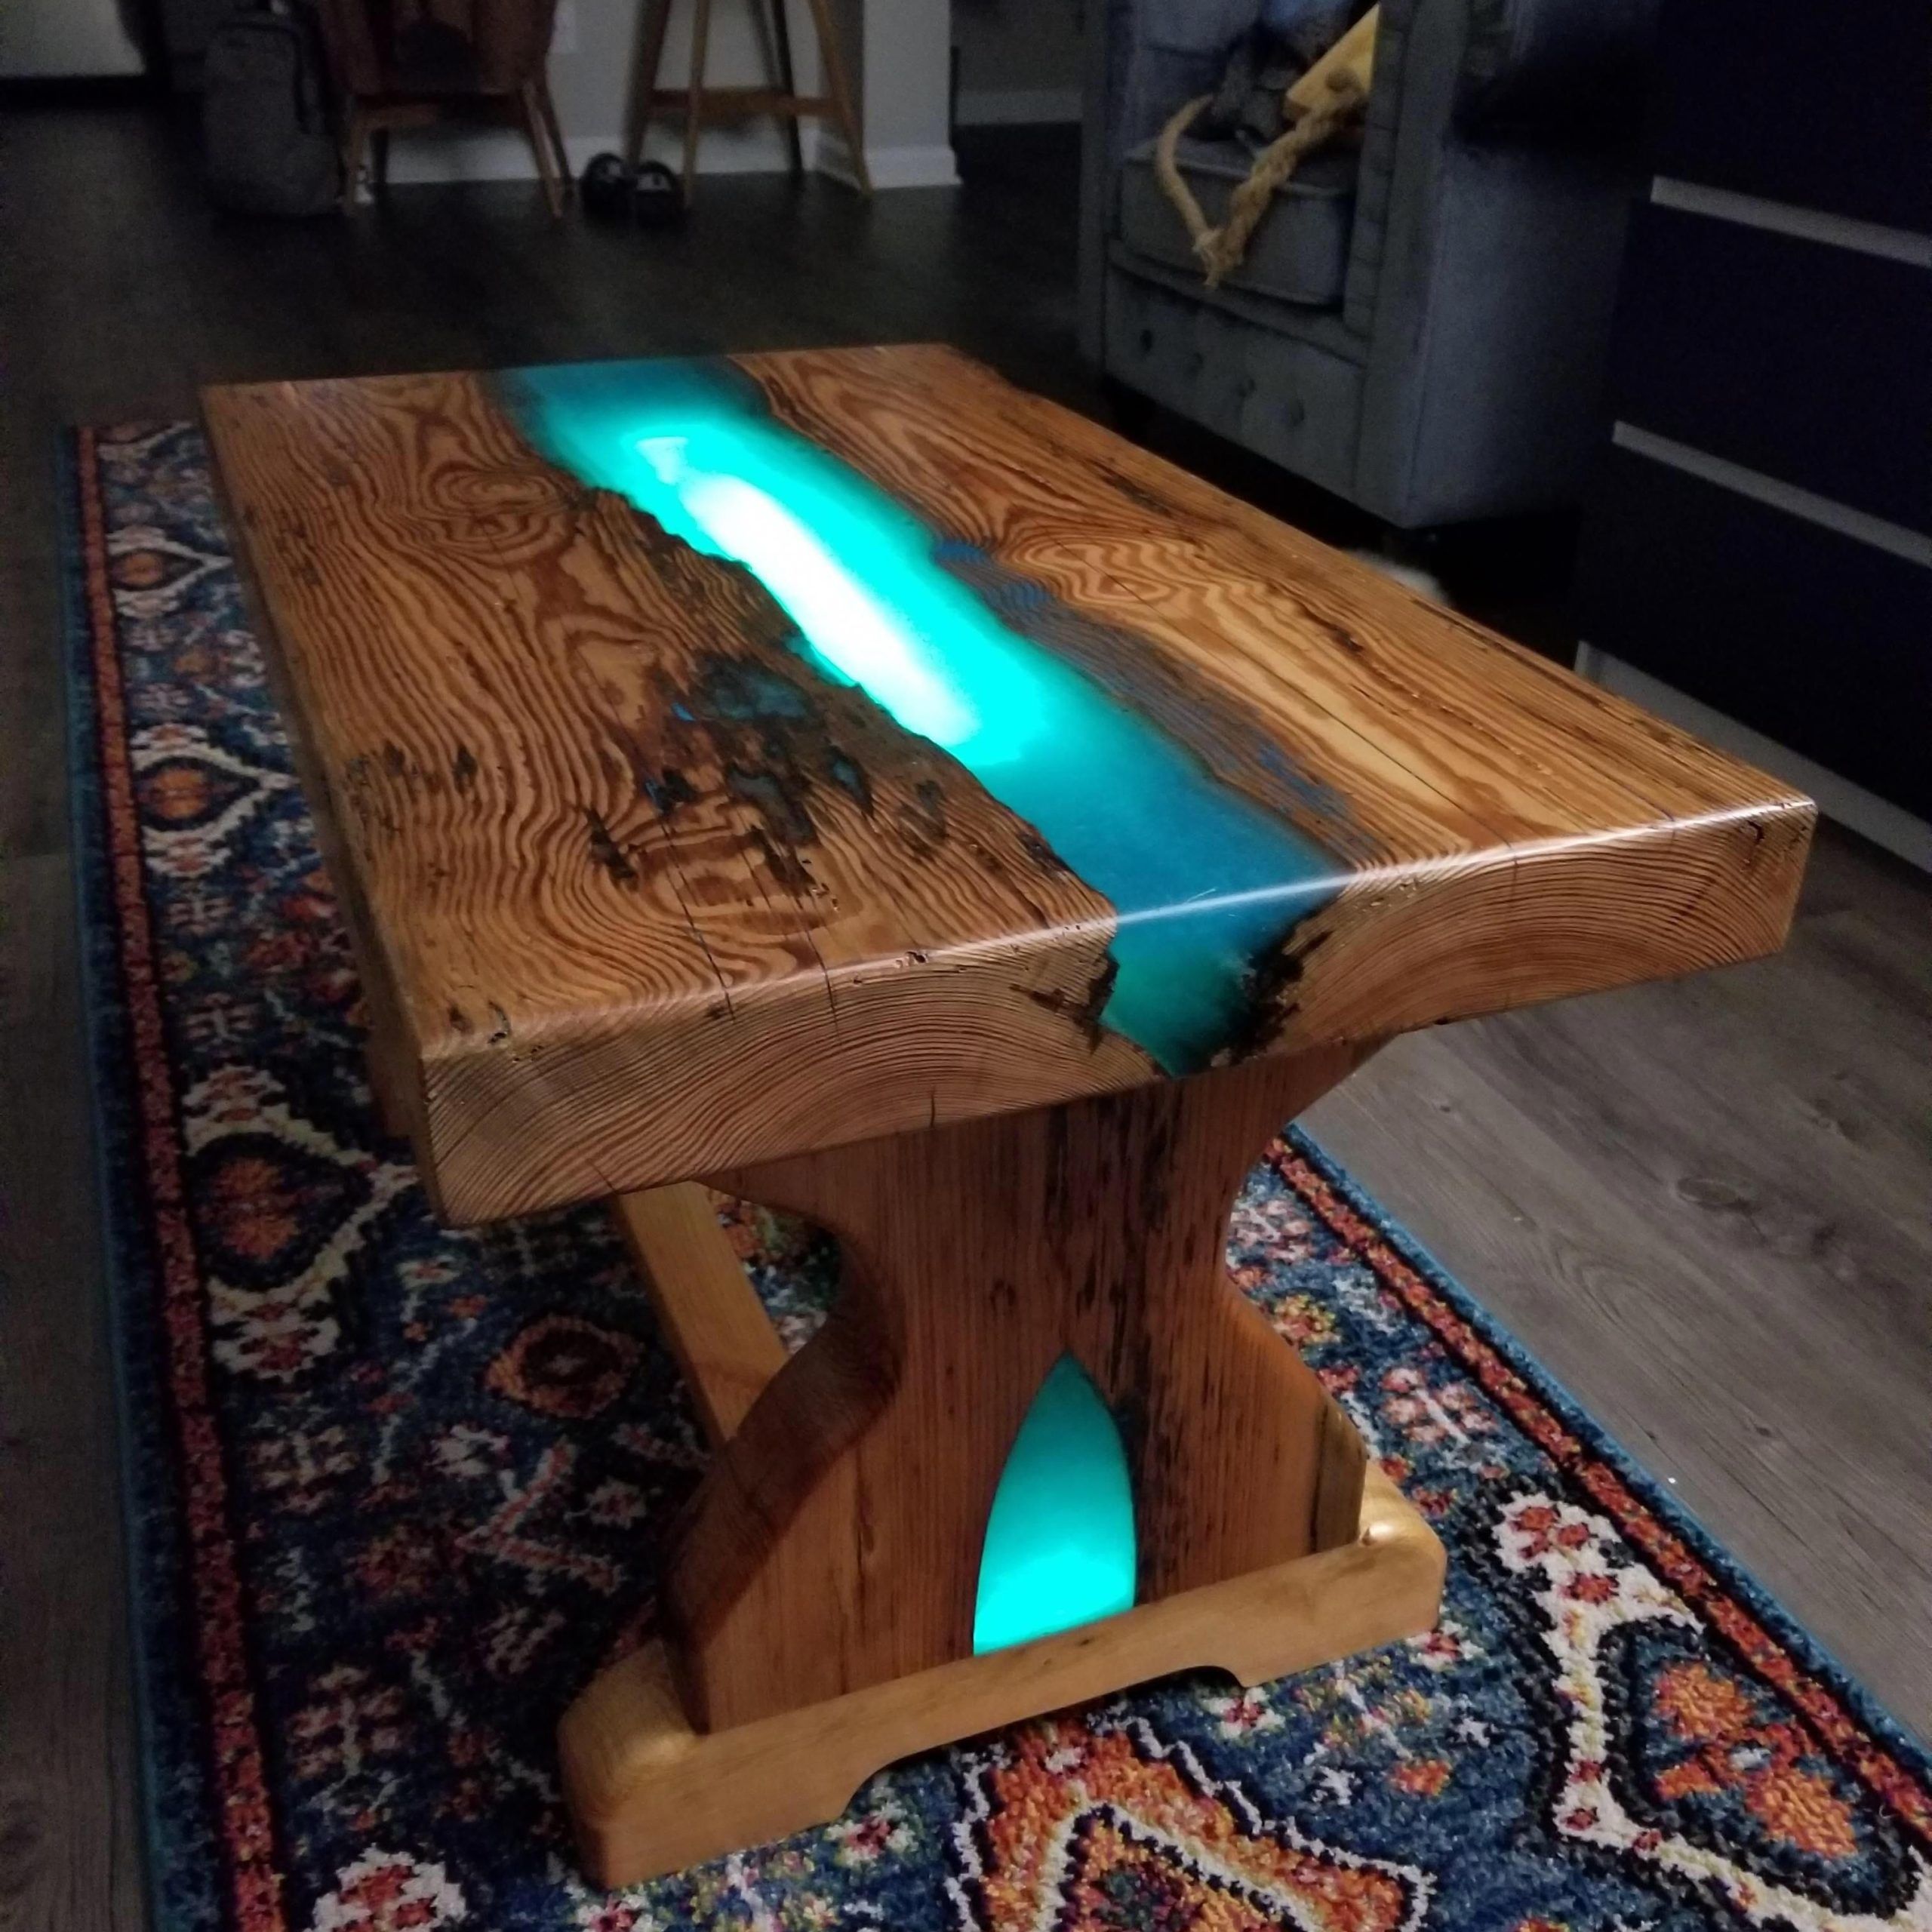 Favorite Coffee Tables With Led Lights With Regard To This Led Lit Coffee Table My Girlfriend's Dad Built For Us # (View 14 of 15)